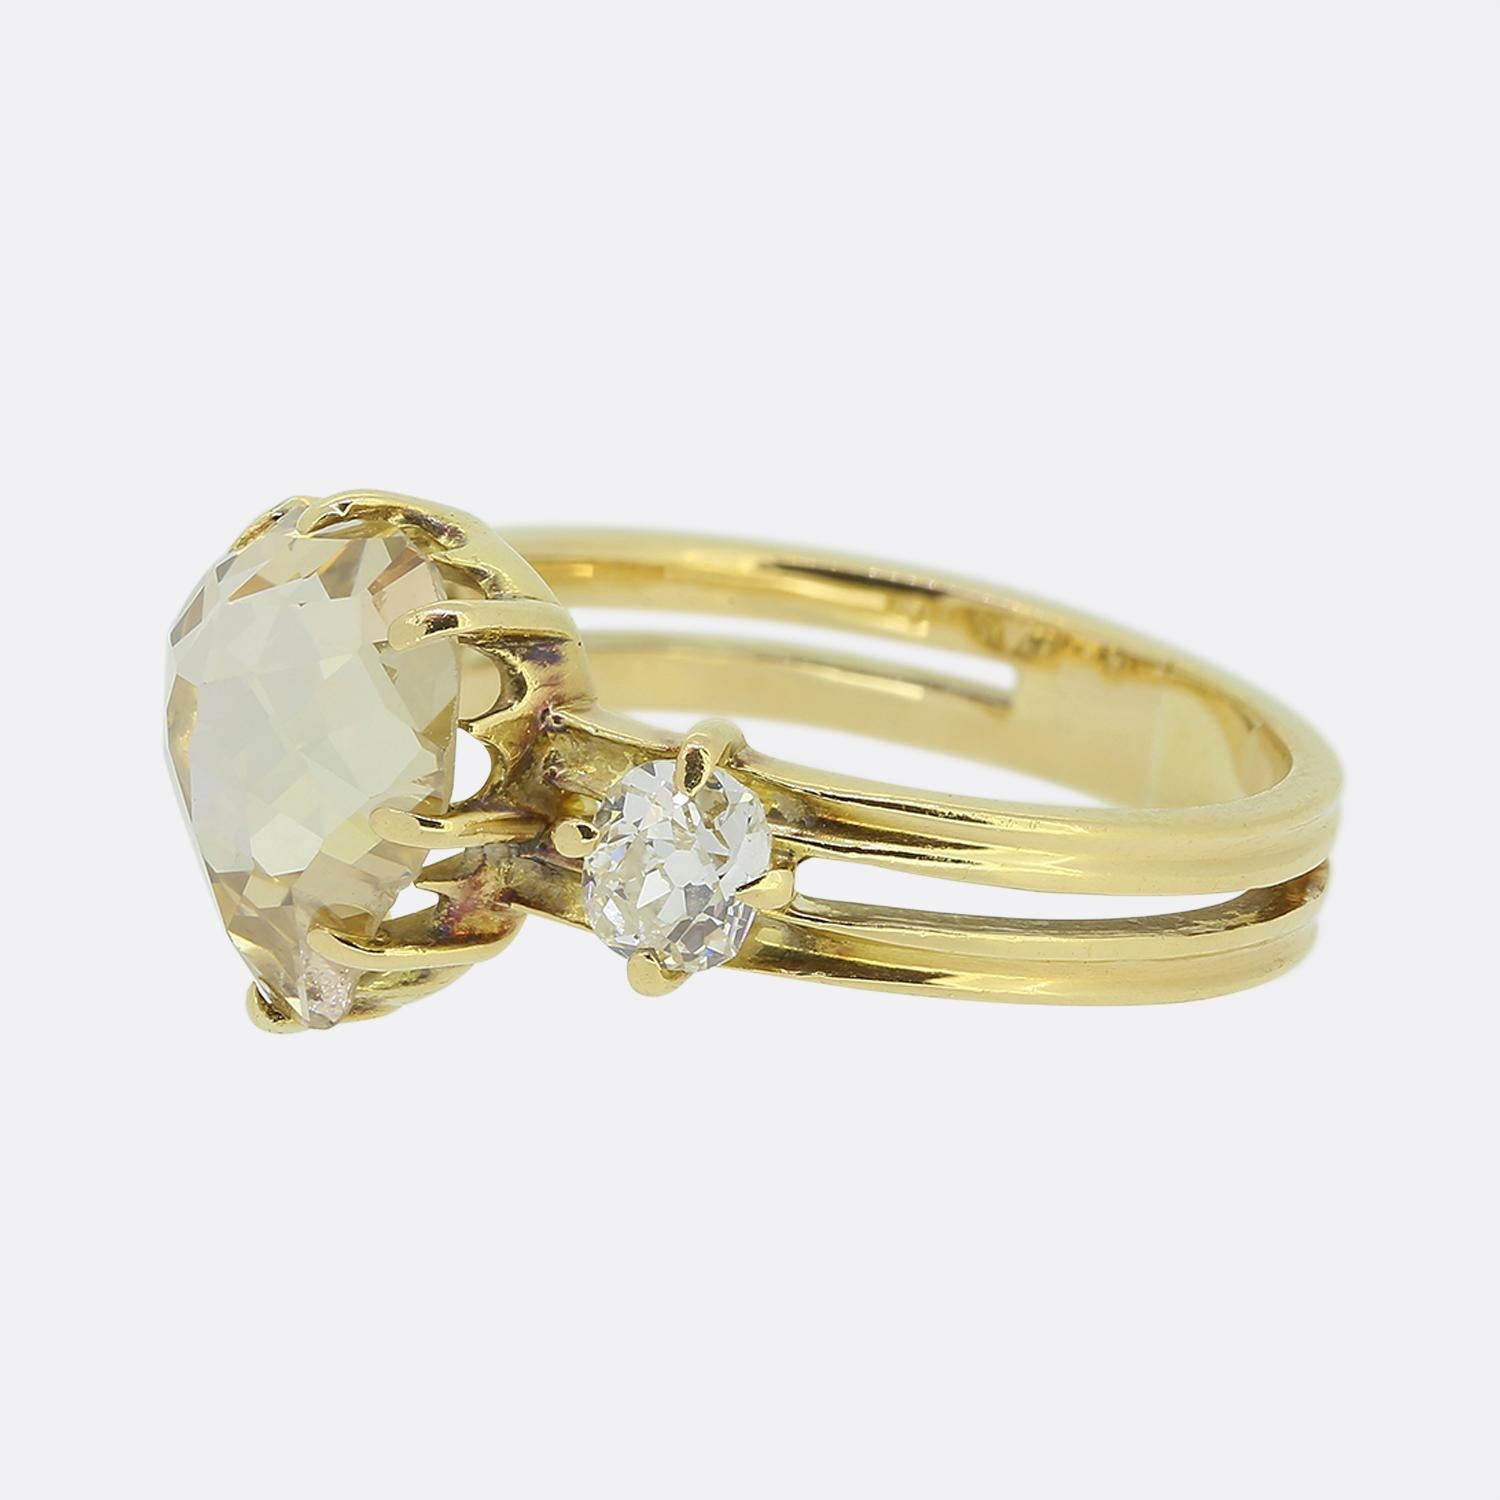 Here we have a gorgeous diamond ring dating back to the Edwardian period. This antique 18ct gold piece exudes romance with a chunky heart-shaped rose cut diamond taking centre stage. This proud principal stone is then flanked on either side by a